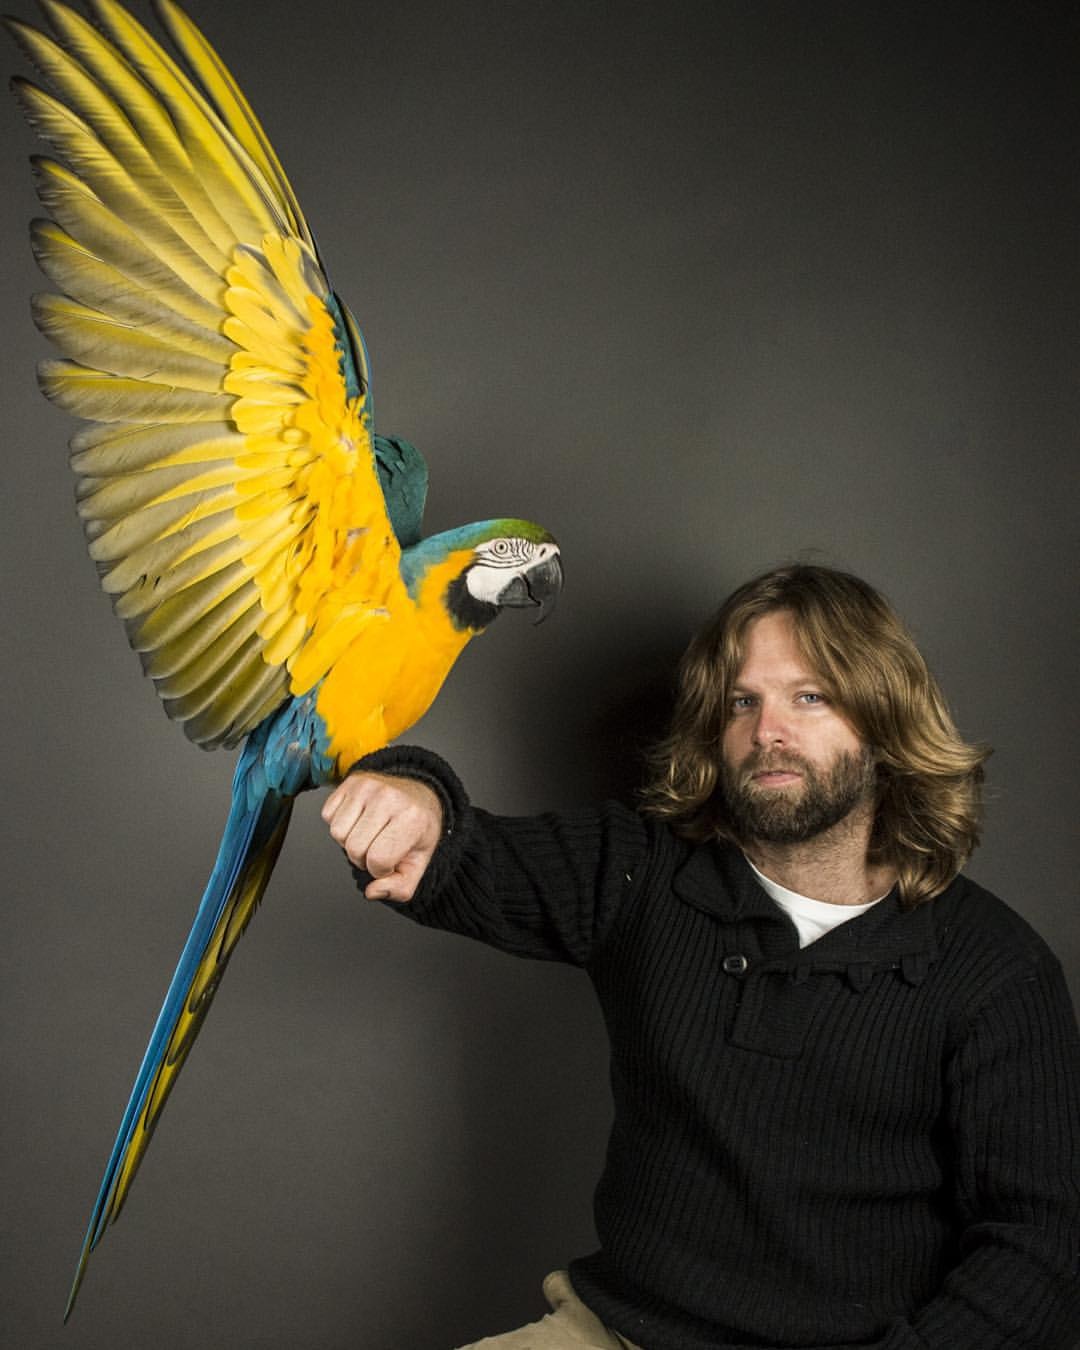 This bloke saves injured birds and teaches them to fly again!